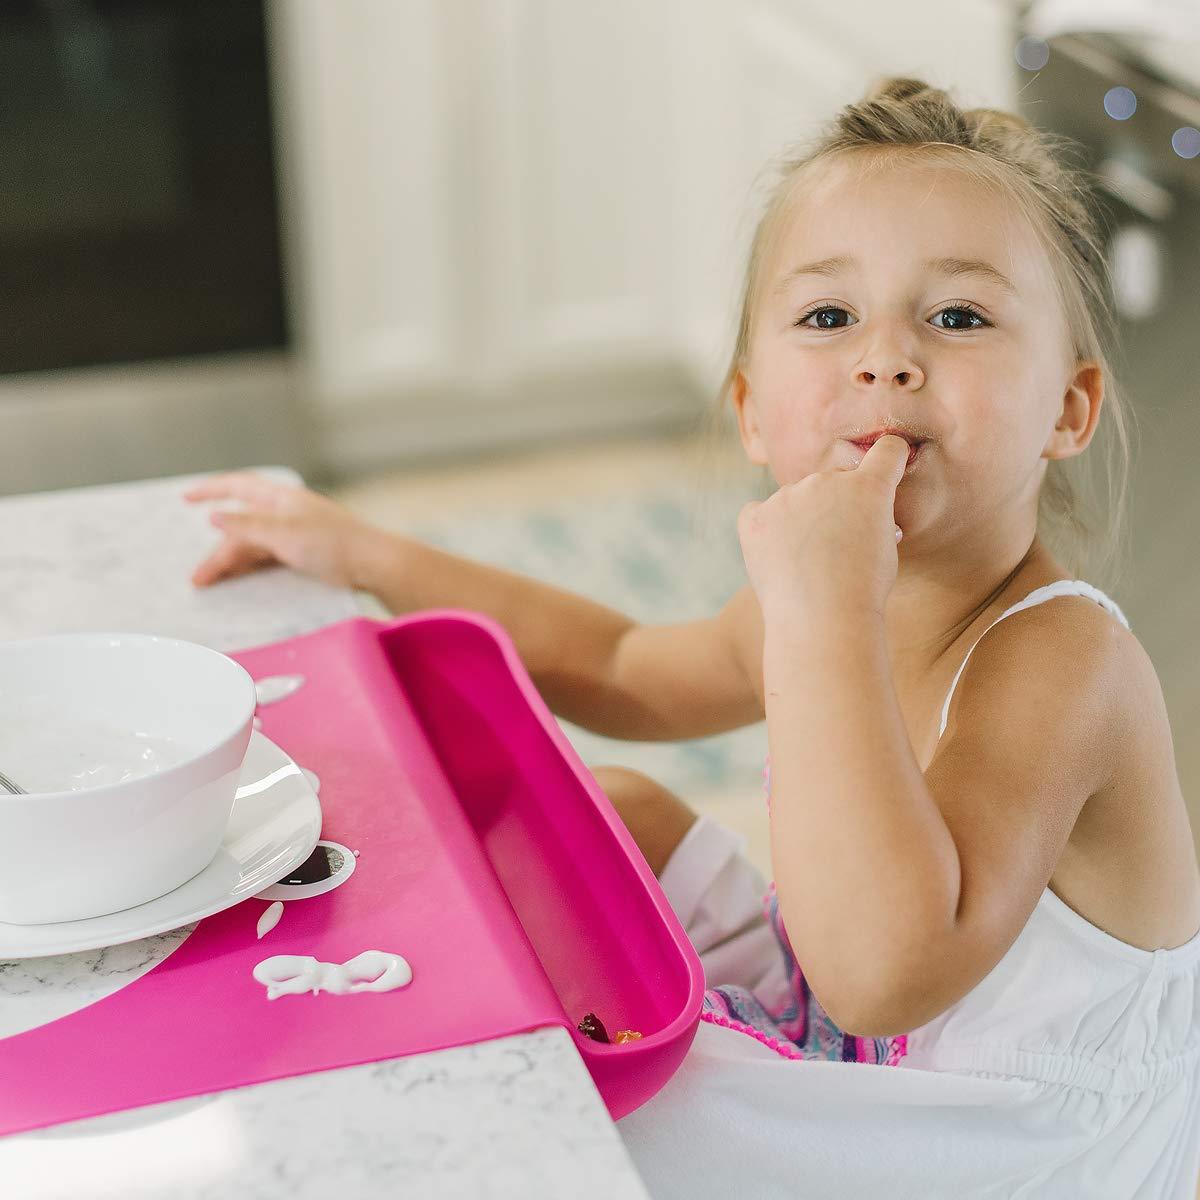 The Cibo Food Catching Baby Placemat with Suction - Wide Mouth